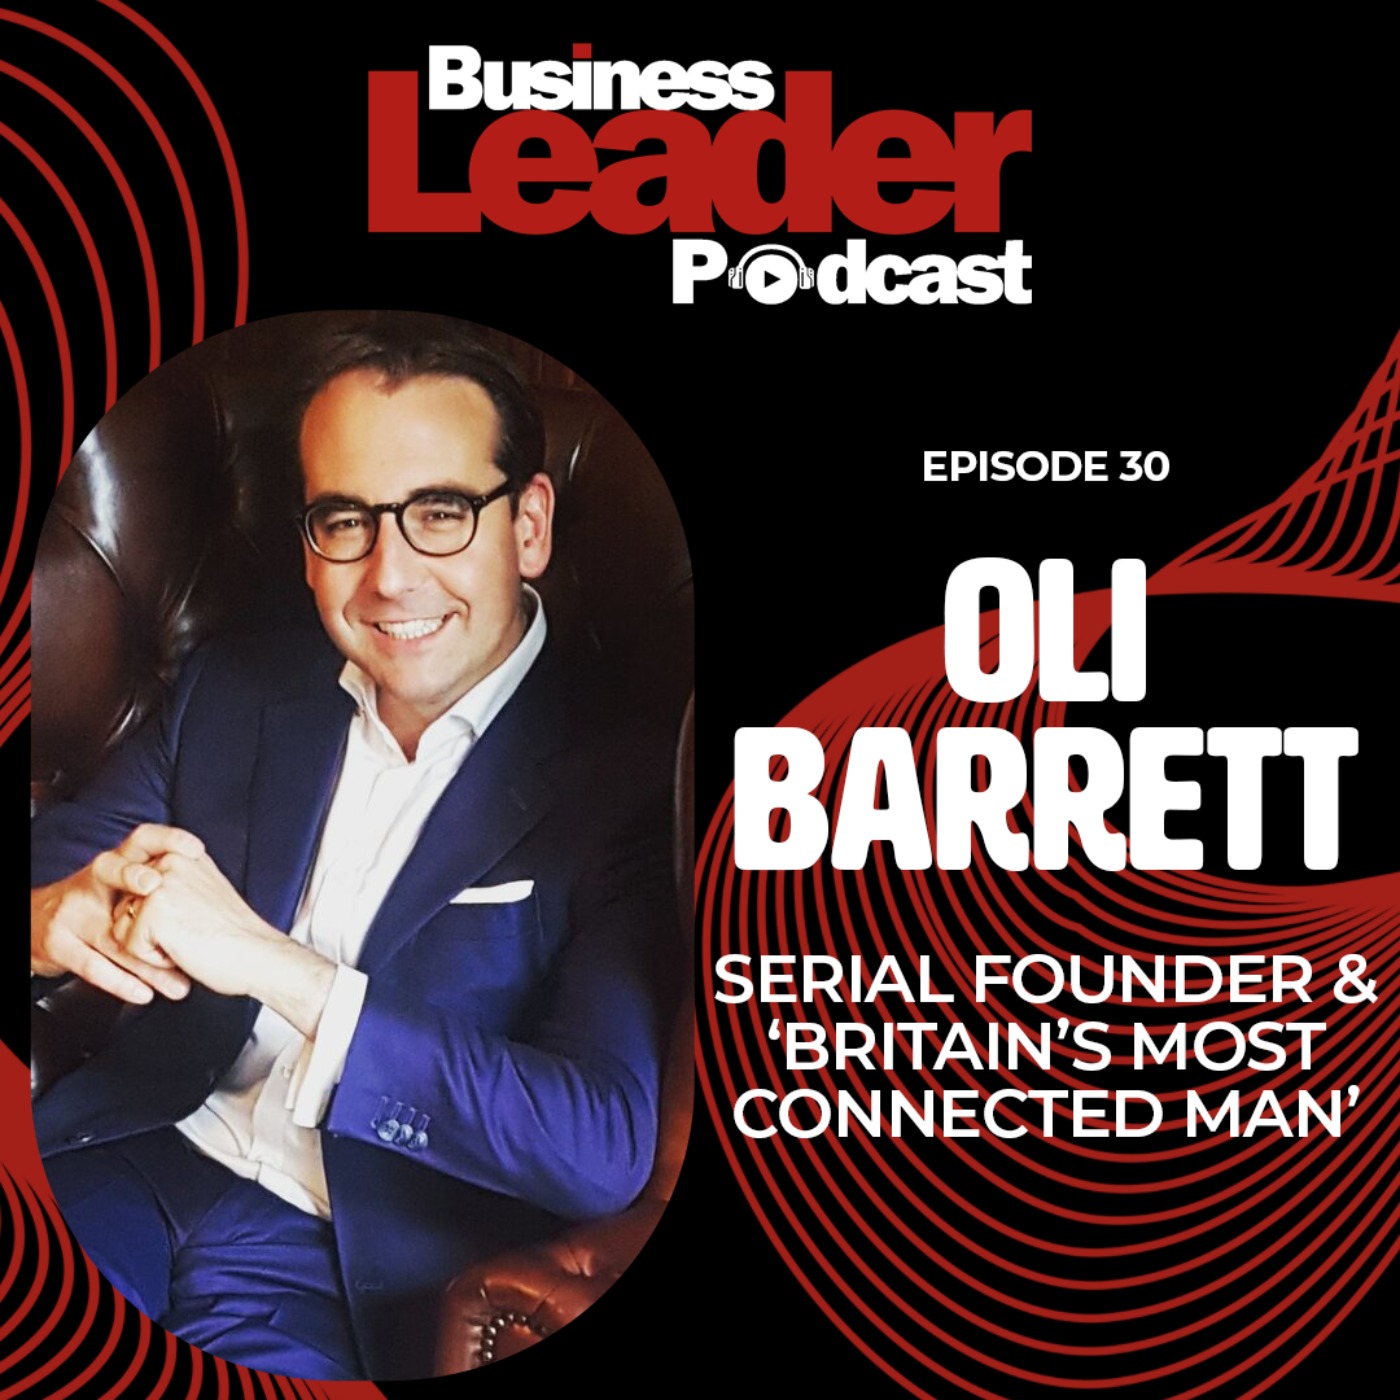 Oli Barrett MBE: serial founder & ‘Britain’s most connected man’